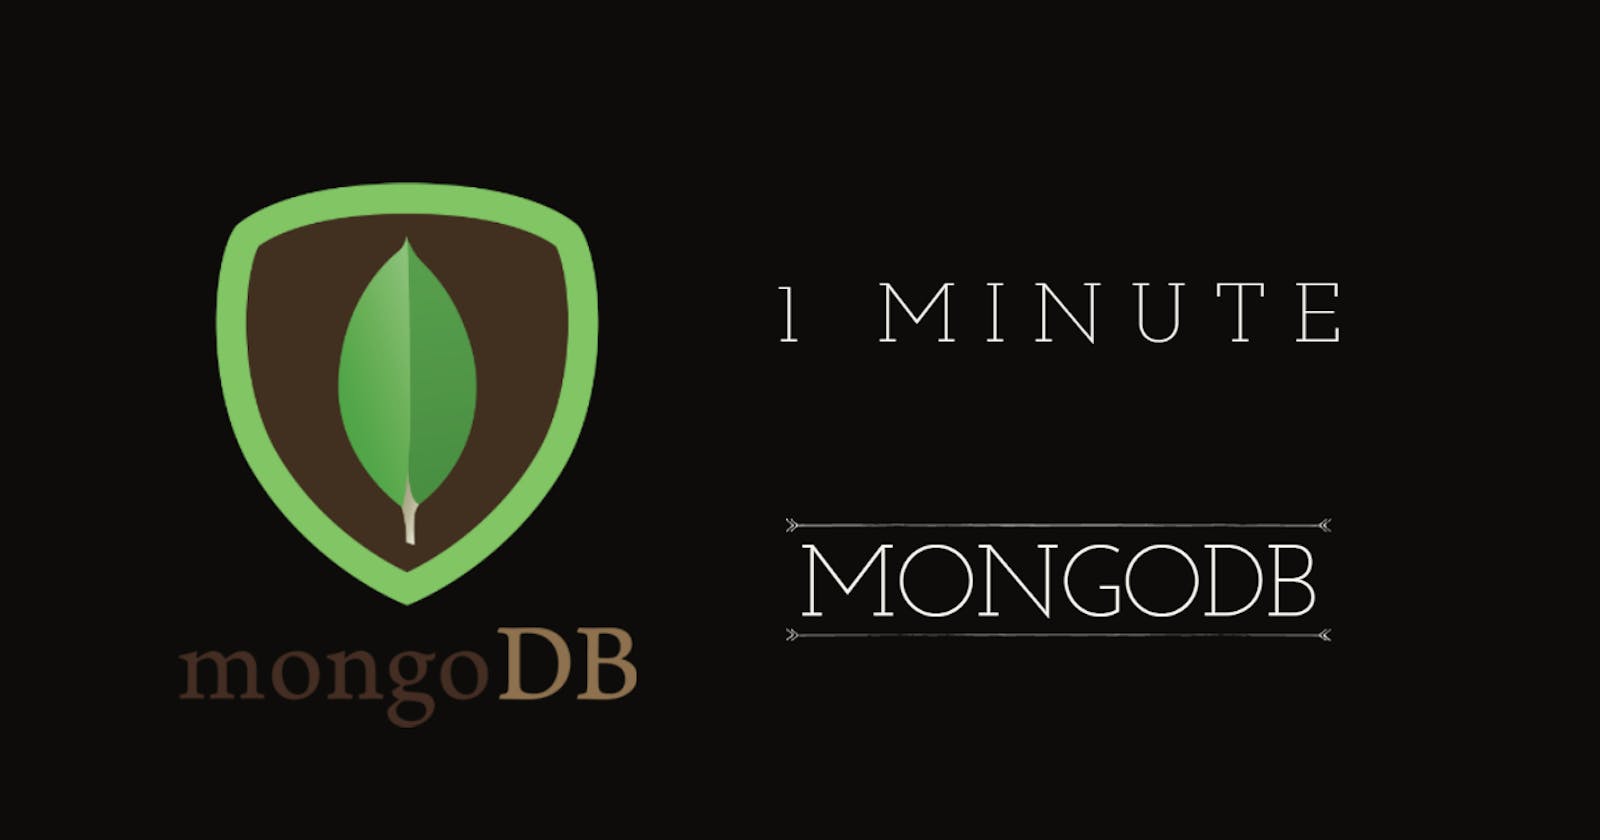 In One Minute : MongoDB